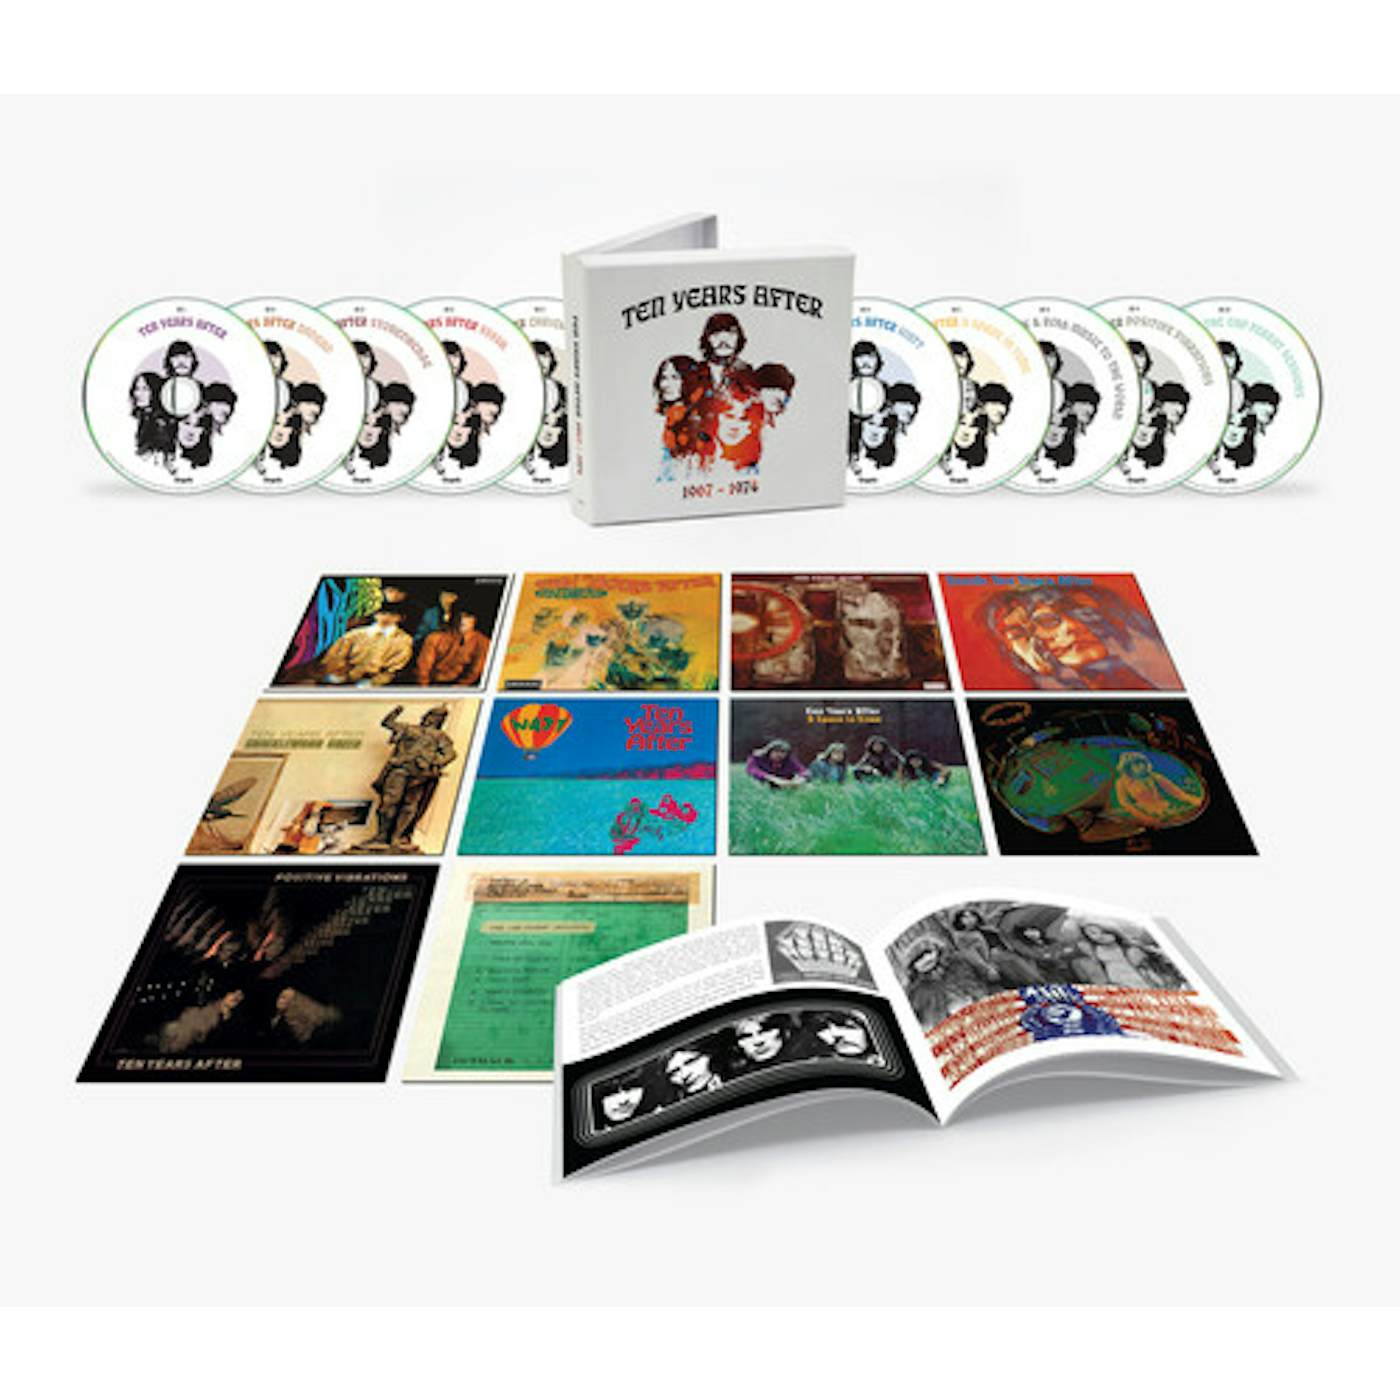 Ten Years After 1967-1974 CD